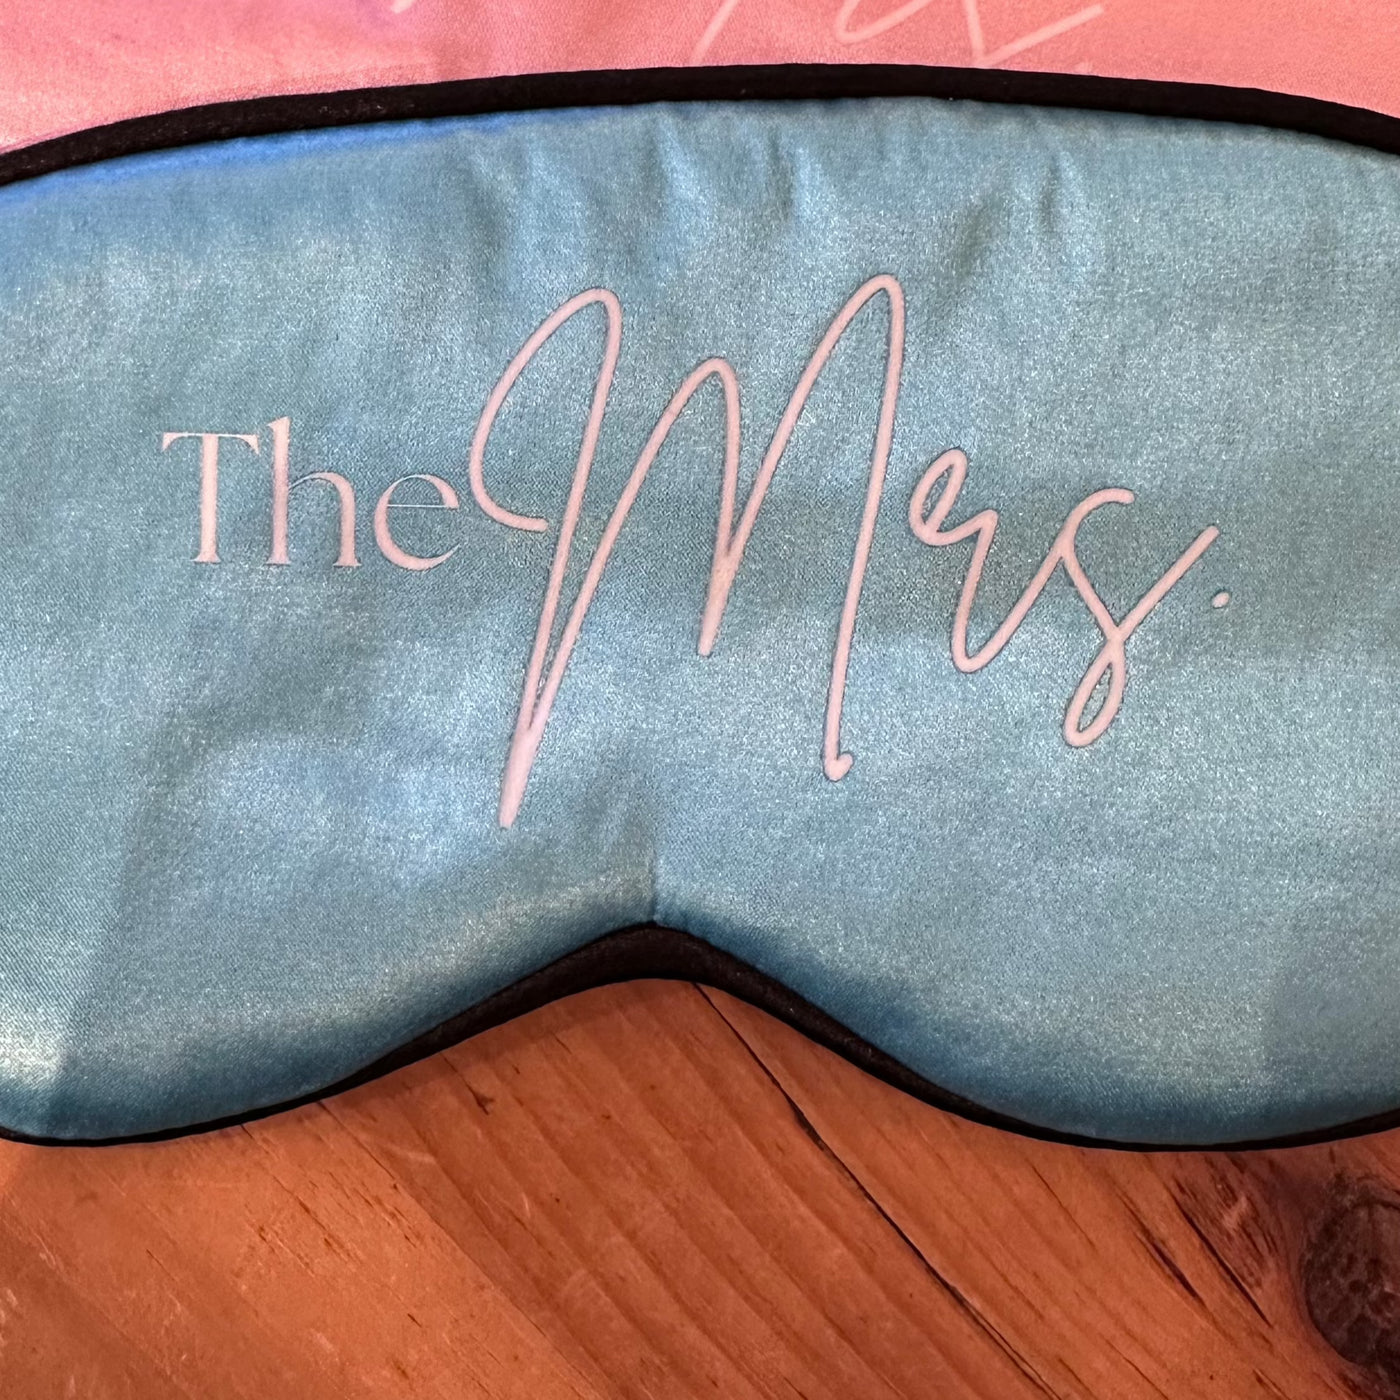 "The Mrs." Satin Eye Mask-Accessories-Anna Bella Fine Lingerie-Blue-Anna Bella Fine Lingerie, Reveal Your Most Gorgeous Self!